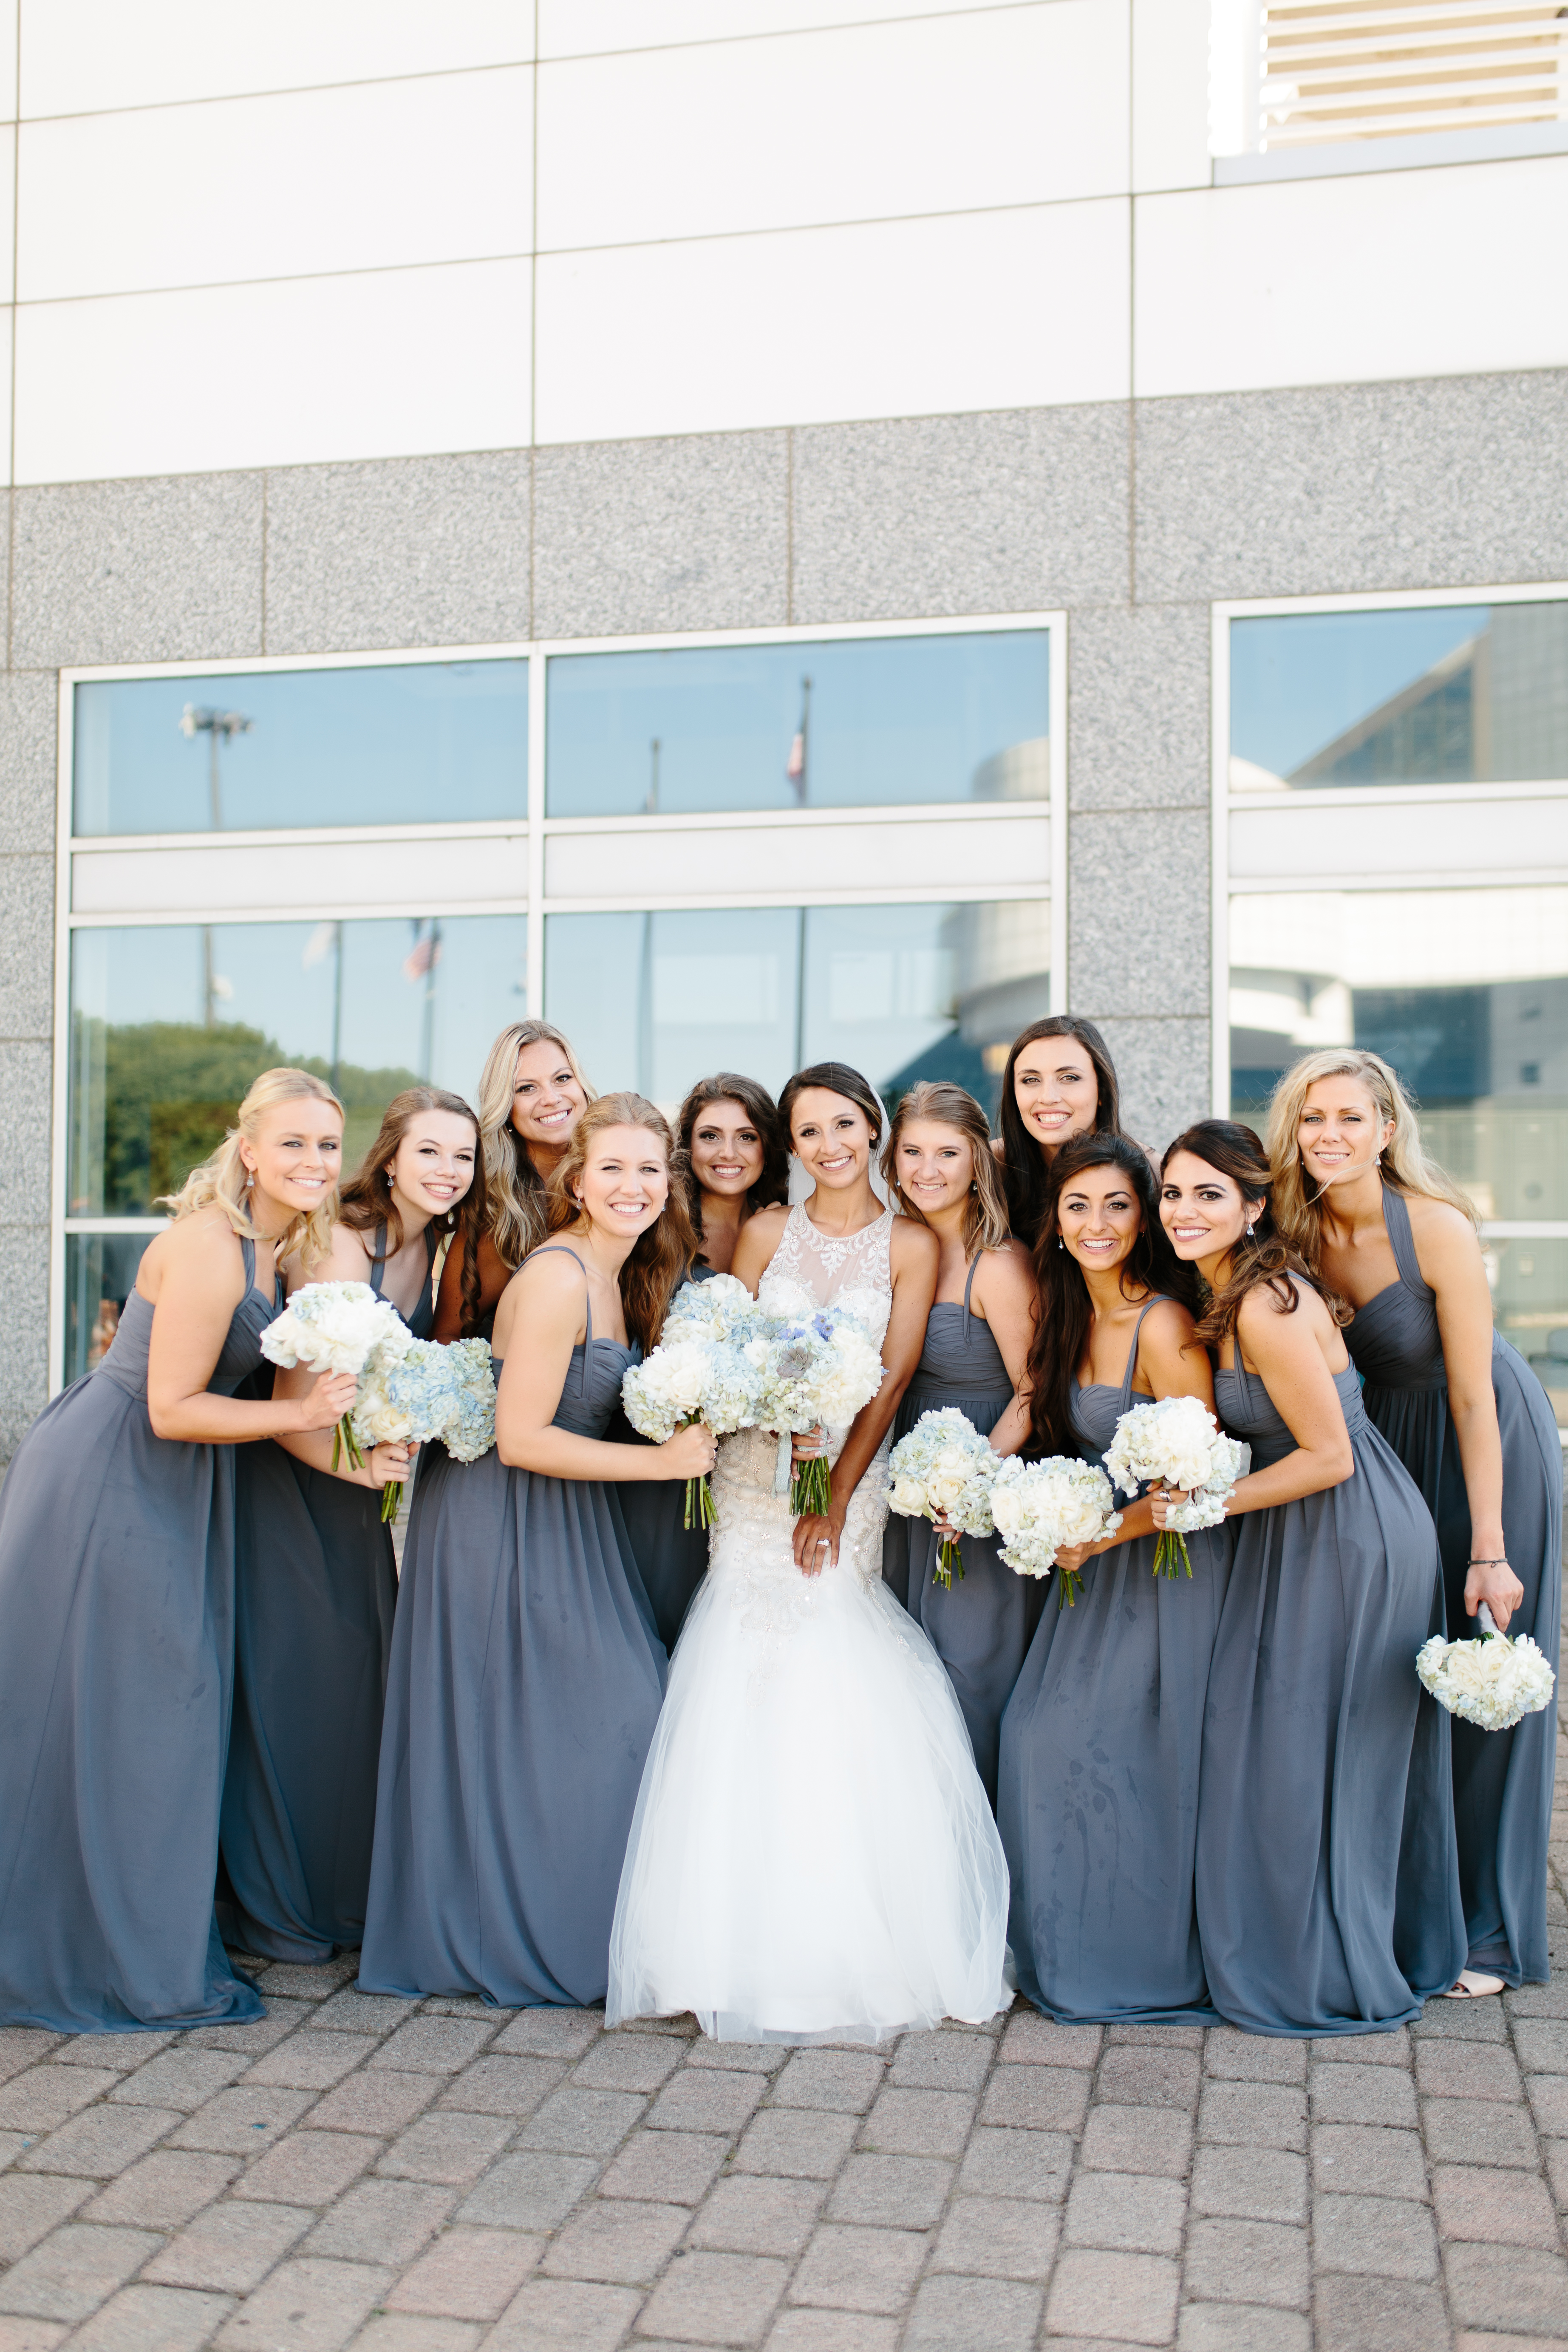 Grey Bridesmaids dresses and Hydrangea bouquets